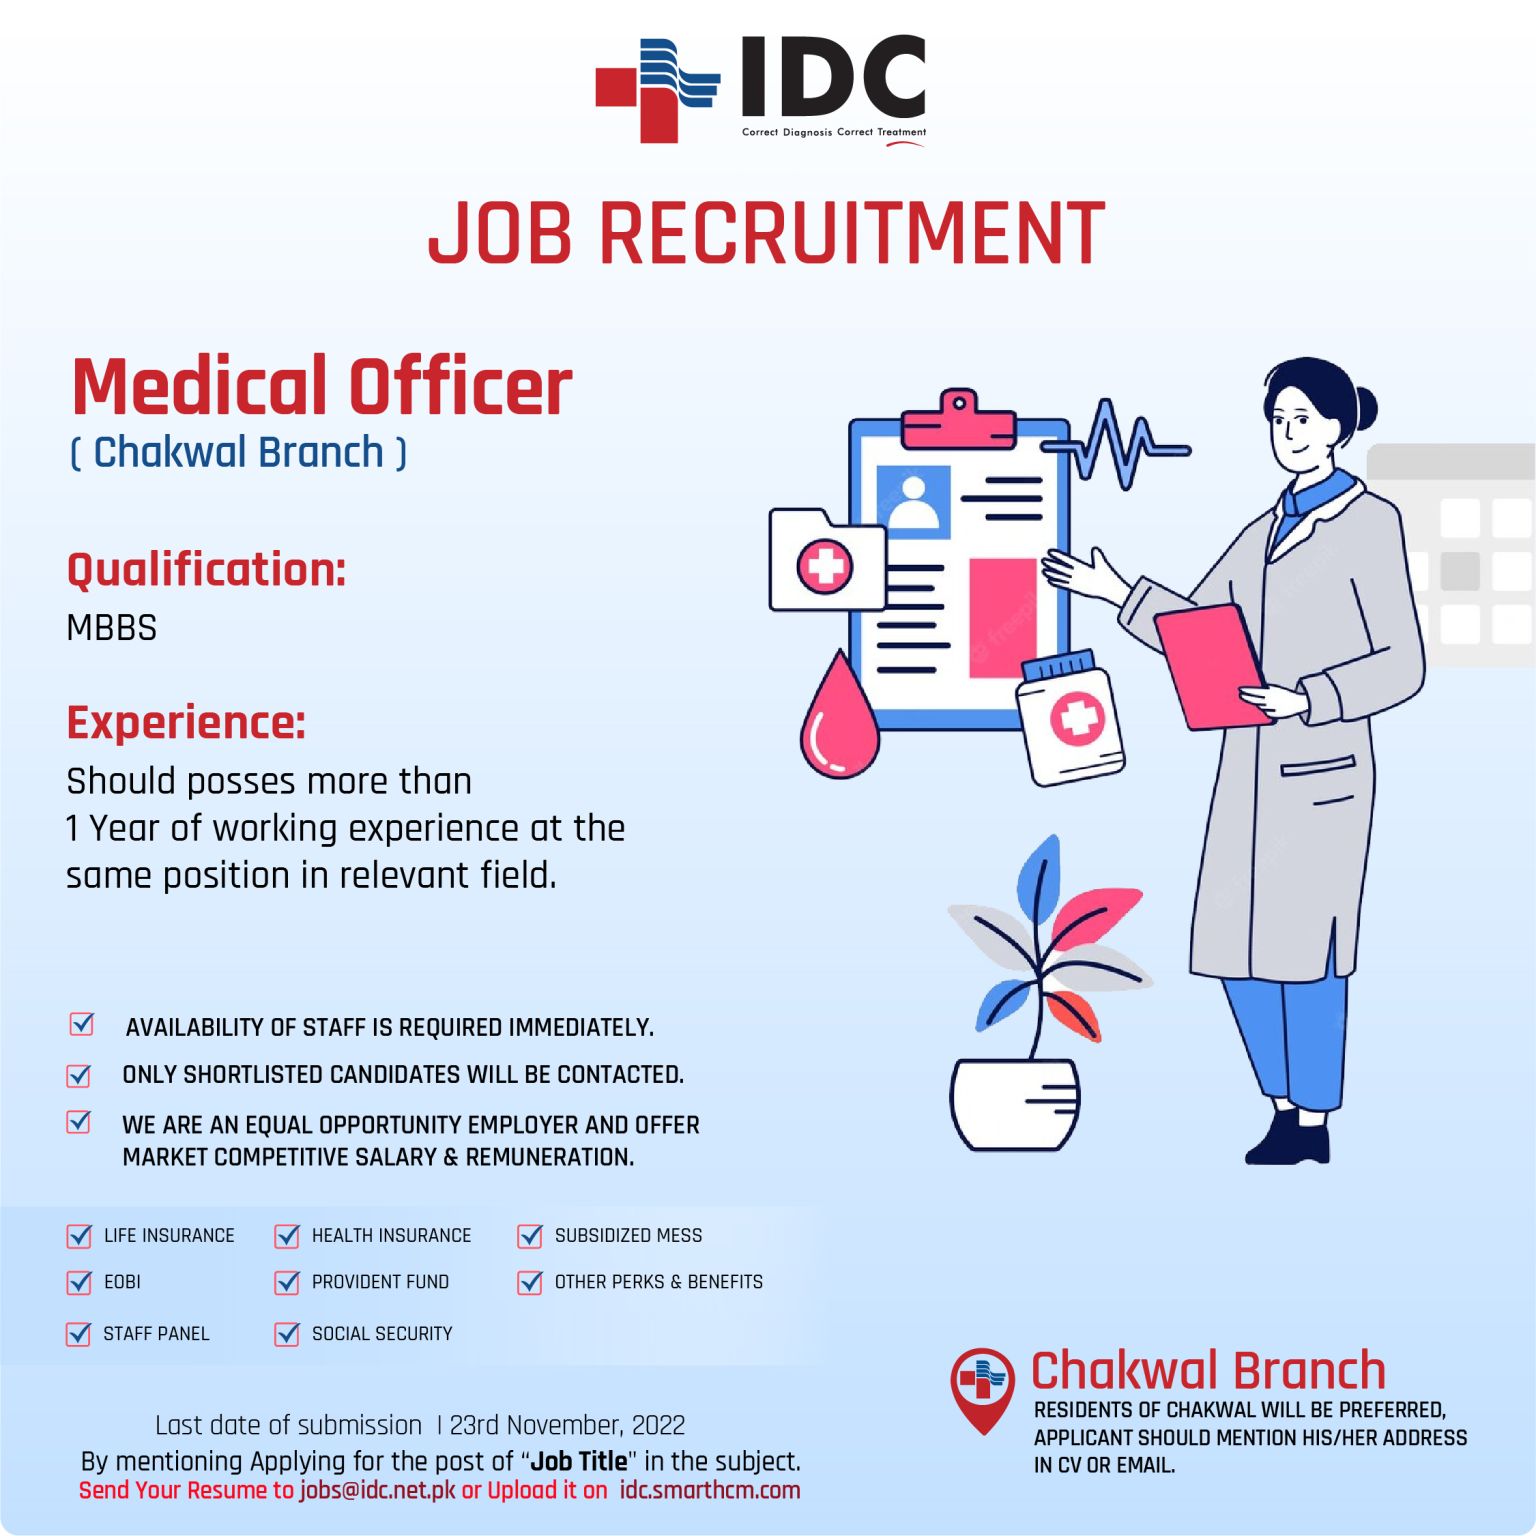 Islamabad Diagnostic Centre IDC Pvt Ltd Announced Jobs For Medical Officer in CHAKWAL Branch